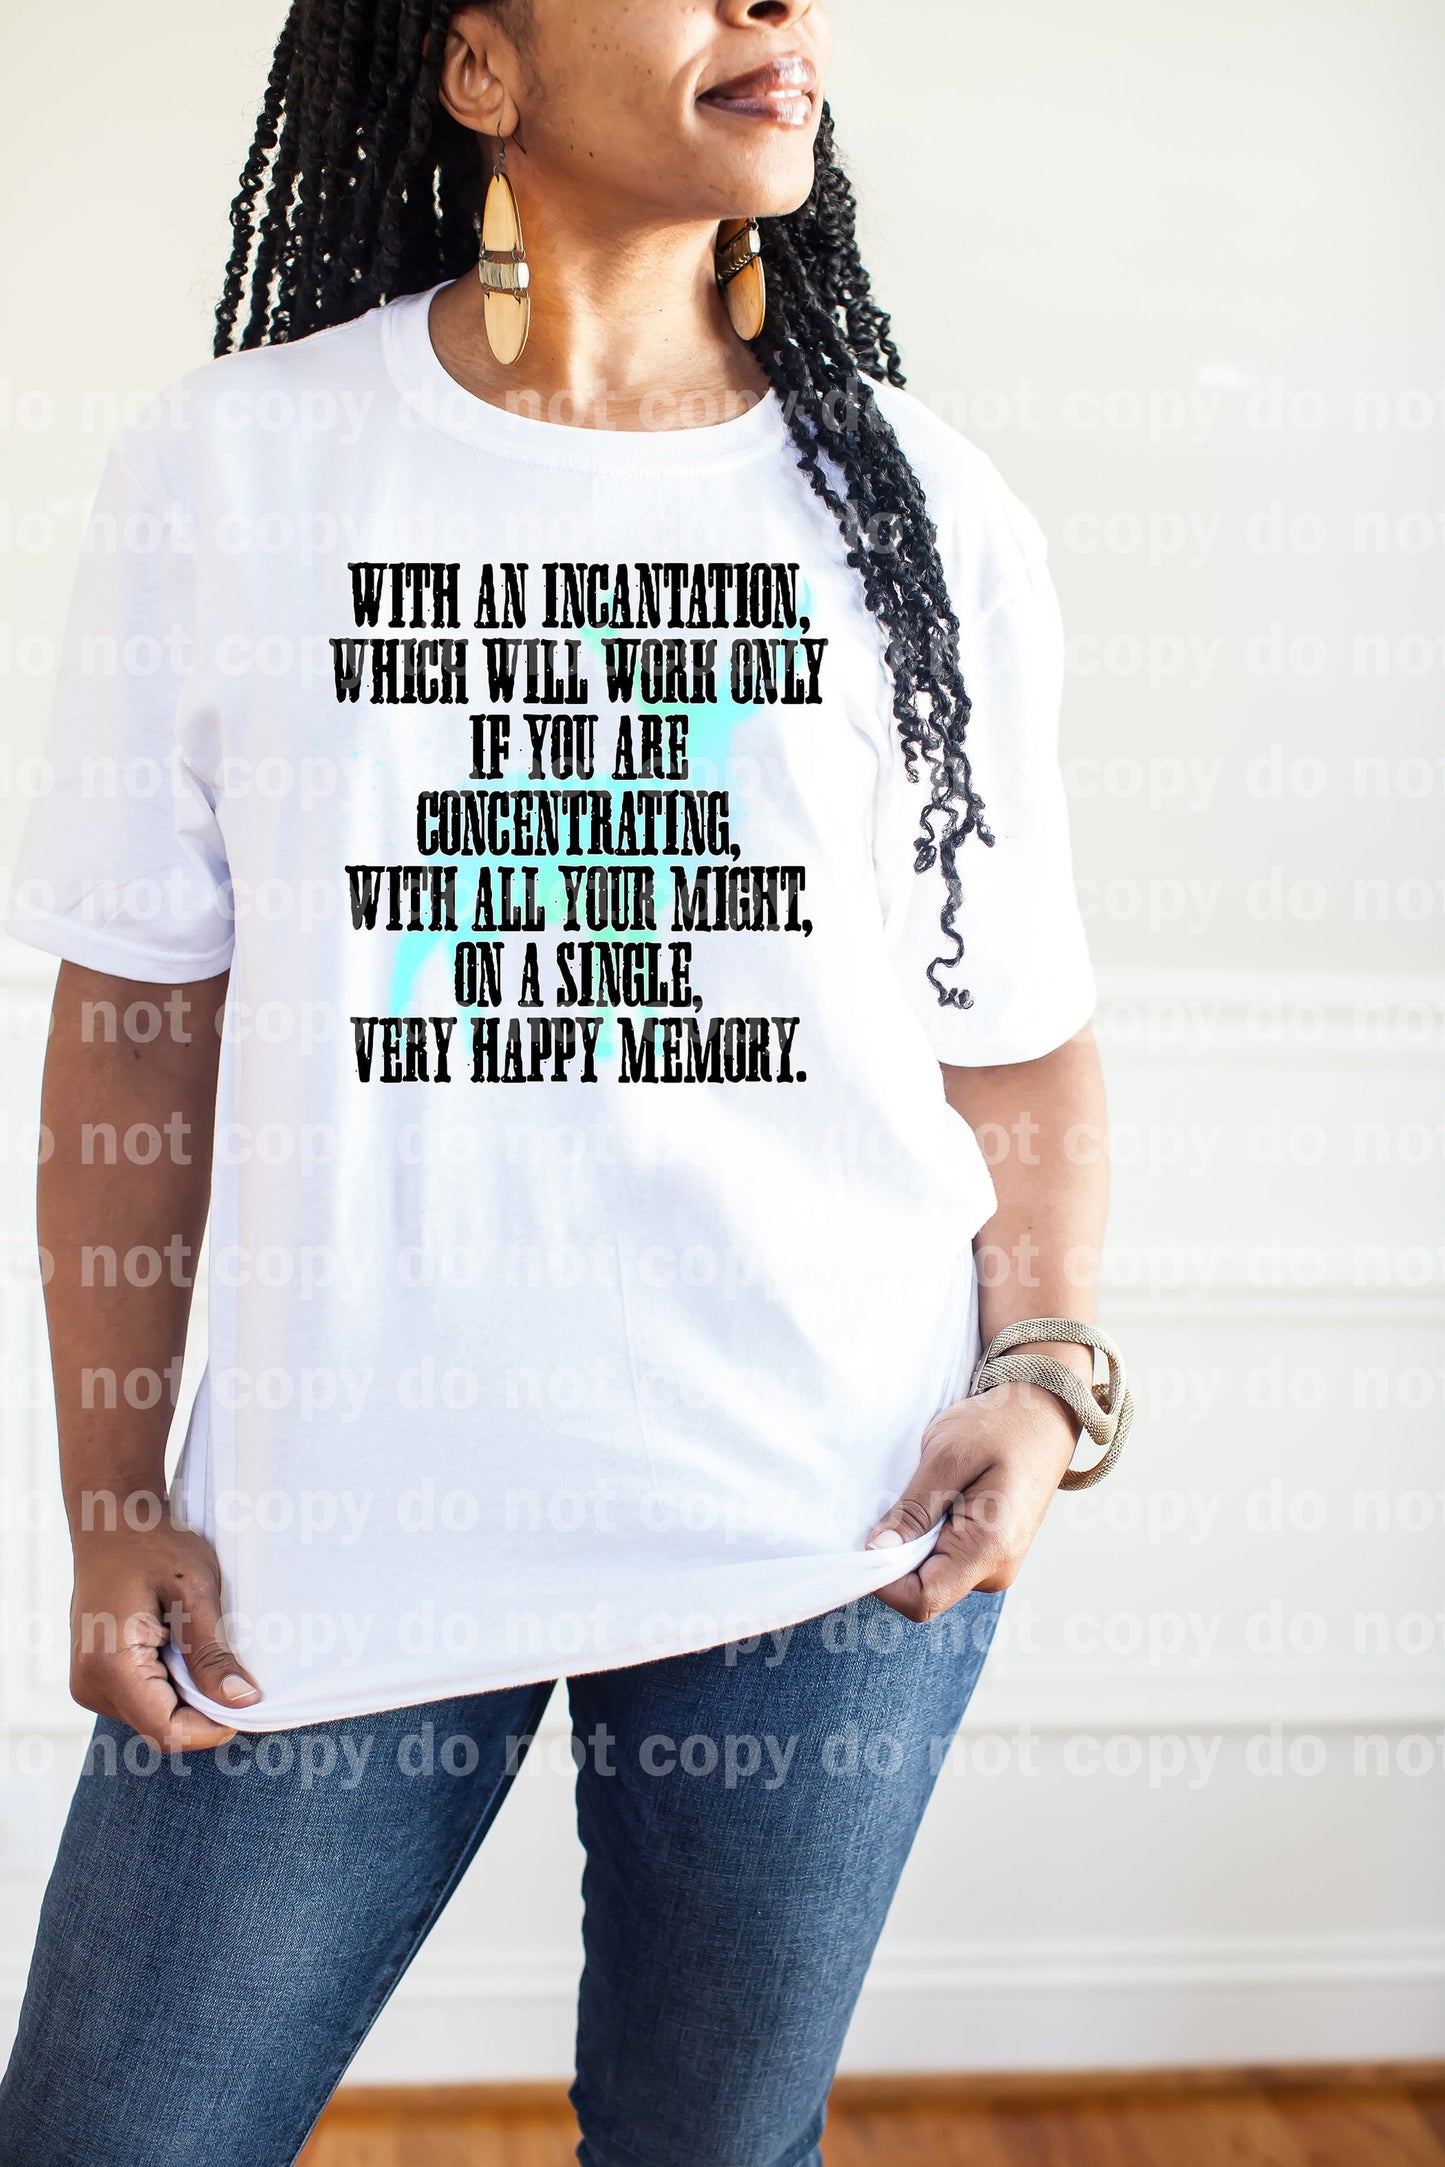 Very Happy Memory Dream Print or Sublimation Print